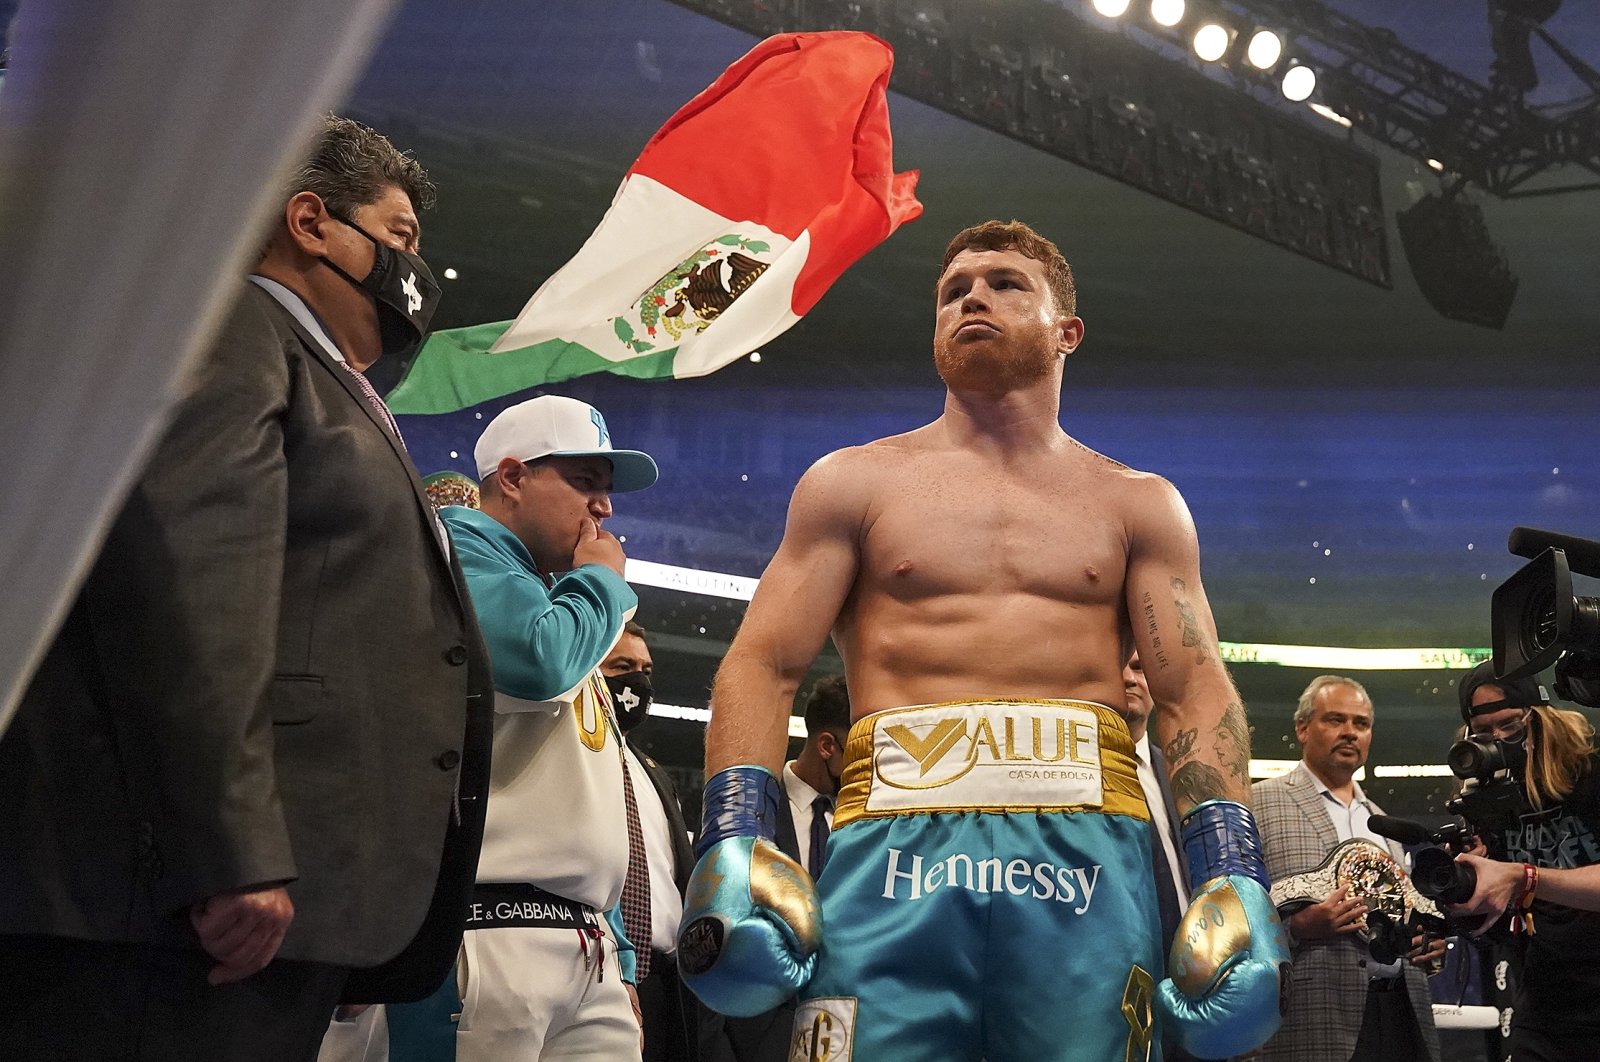 Canelo Alvarez prepares to fight against Billy Joe Saunders during a unified super middleweight world championship boxing match, in Arlington, United States, May 8, 2021. (AP Photo)